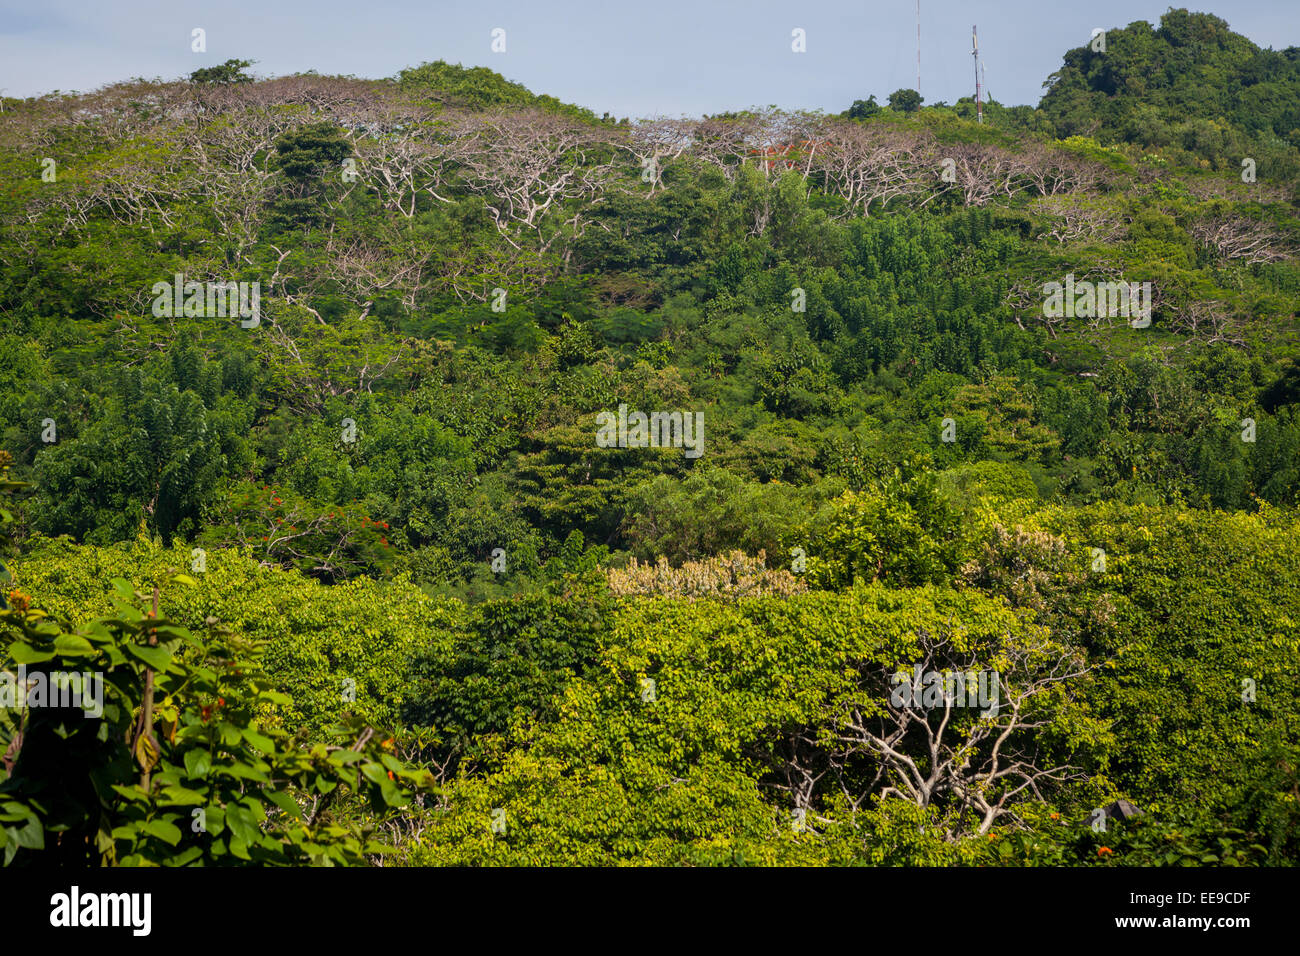 Landscape of tropical forest traditionally protected as sacred monkey habitat in Uluwatu, Bali, Indonesia. Stock Photo